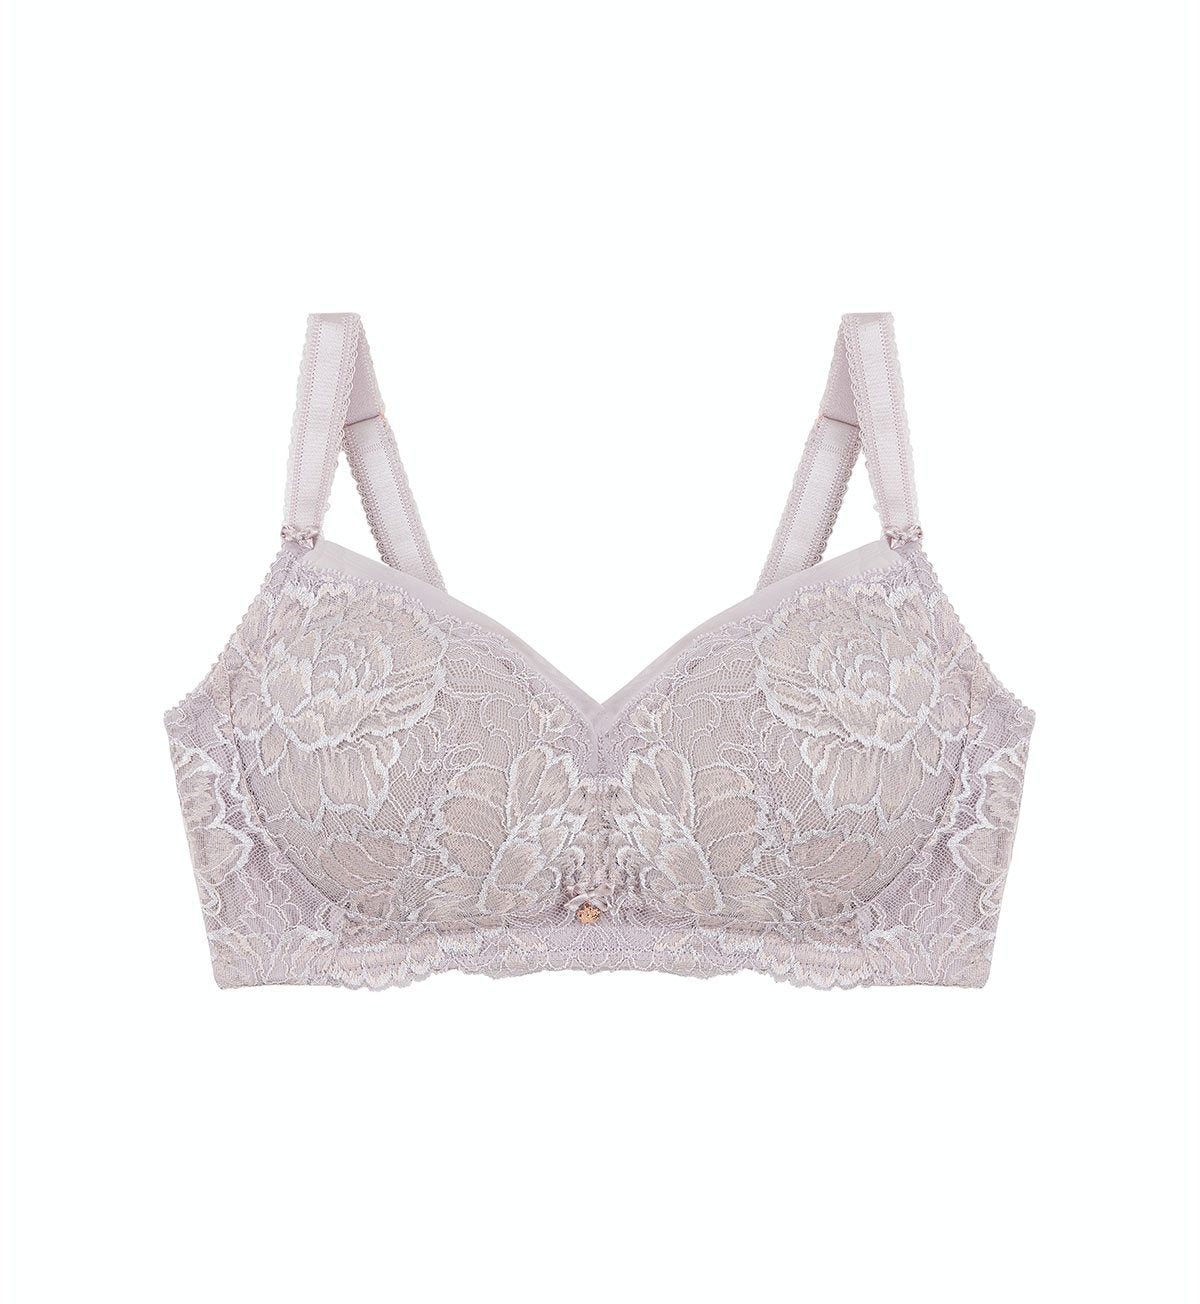 Florale Peony Non-Wired Padded D+ Bra in Tender Purple | Triumph Singapore